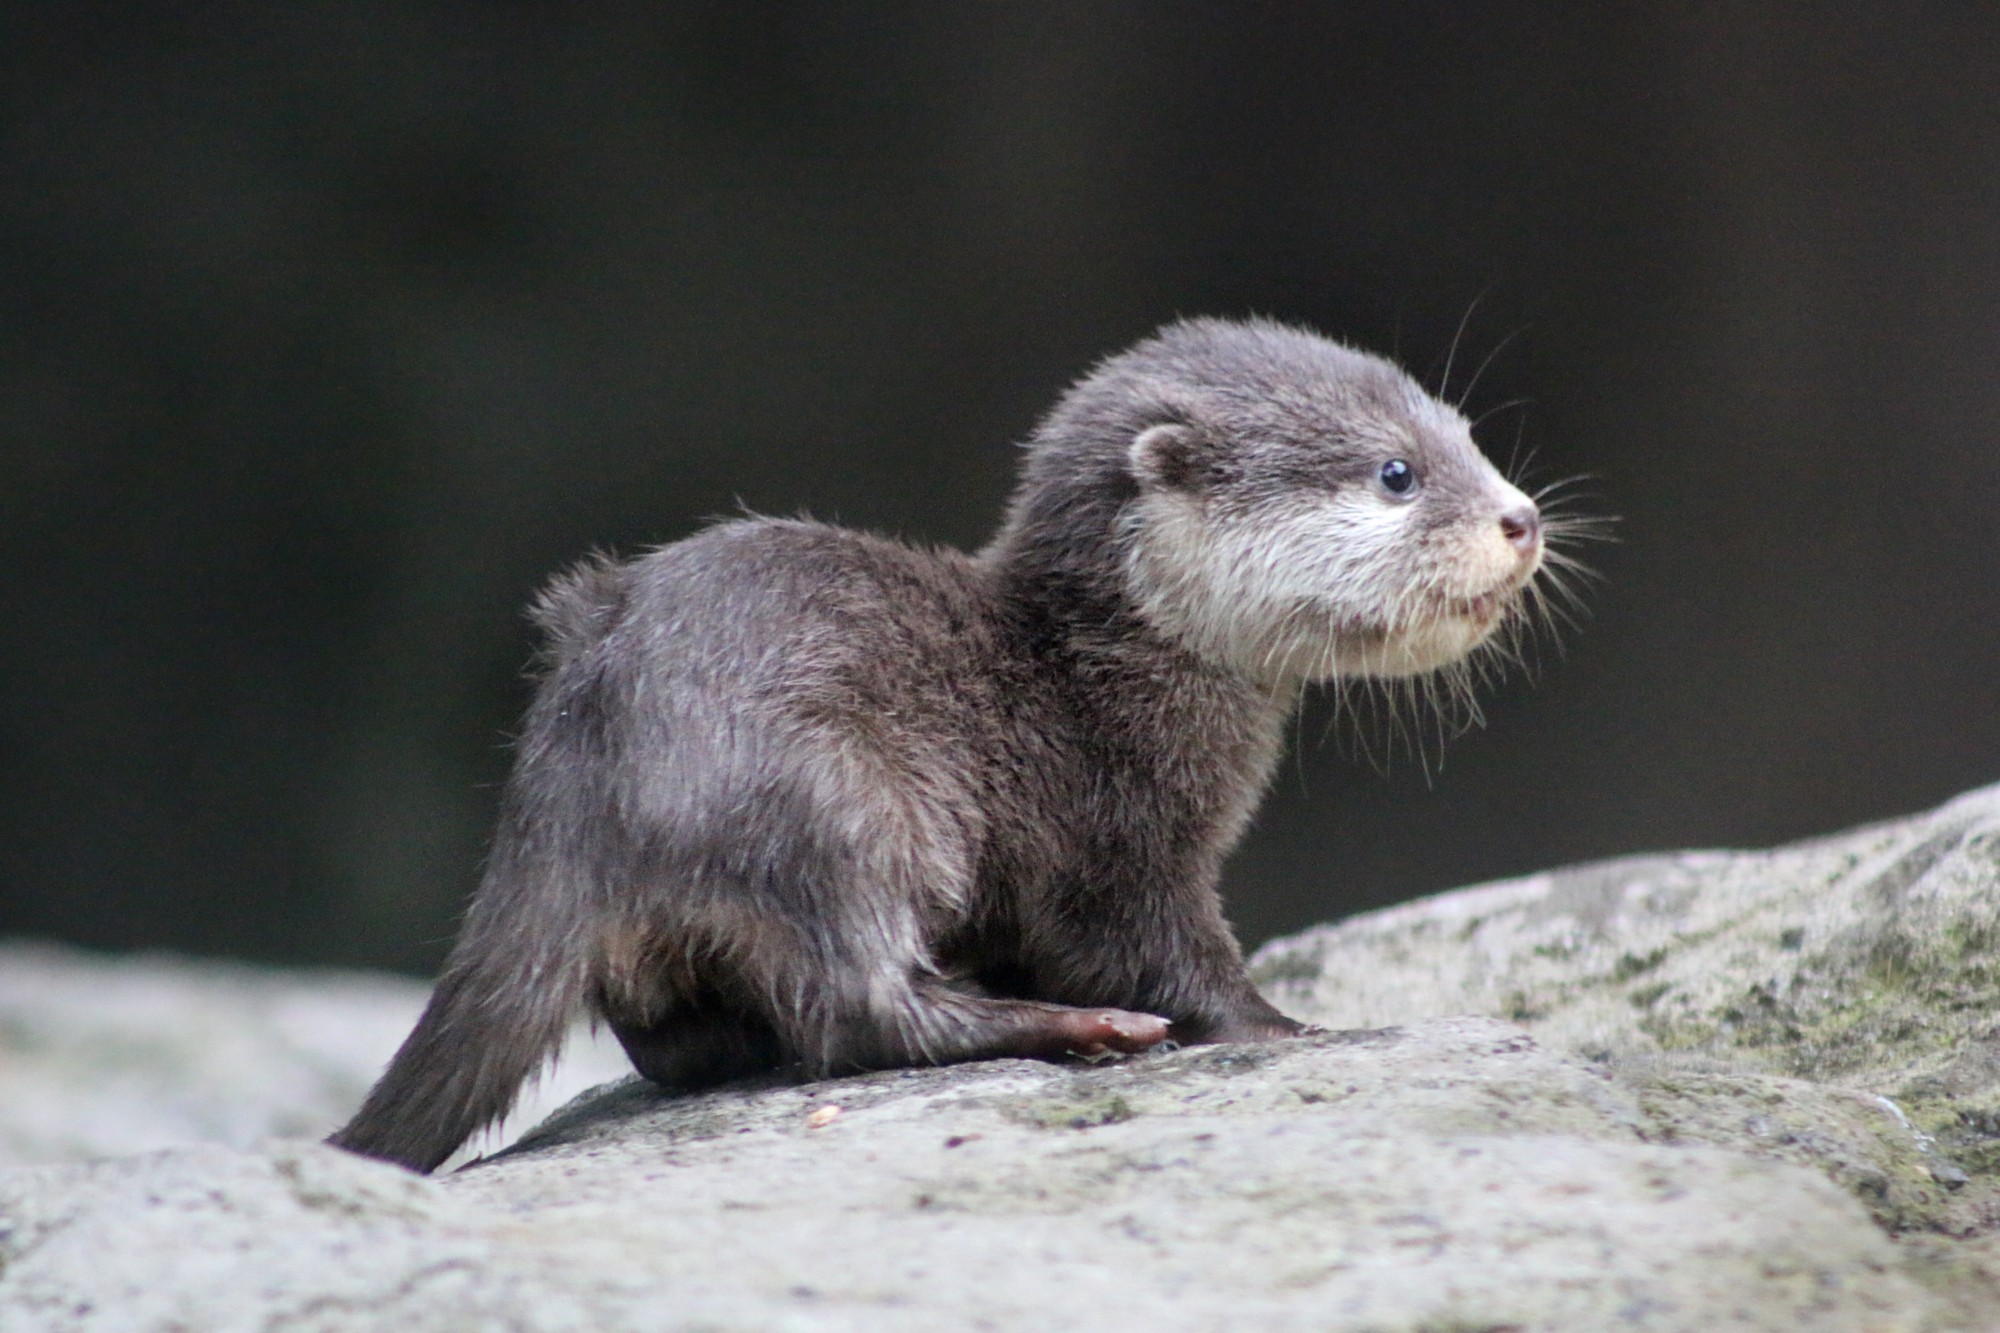 10 facts you might not know about the adorable otter